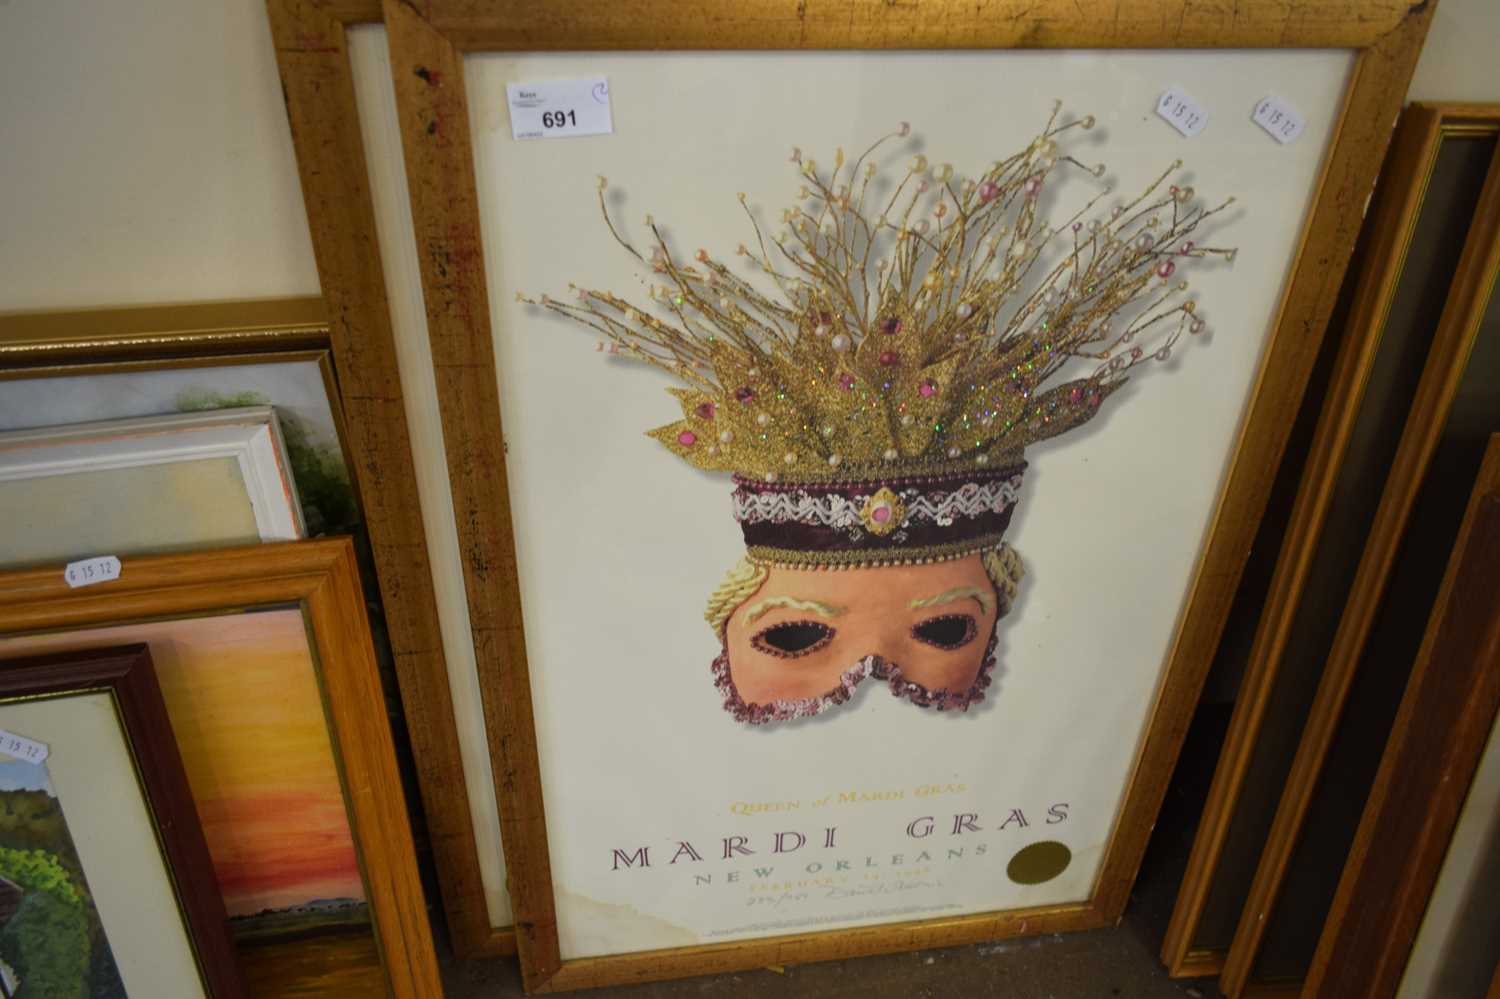 TWO LIMITED EDITION PRINTS FOR THE MARDI GRAS BY DANIEL RESNIC, IN GILT FRAMES